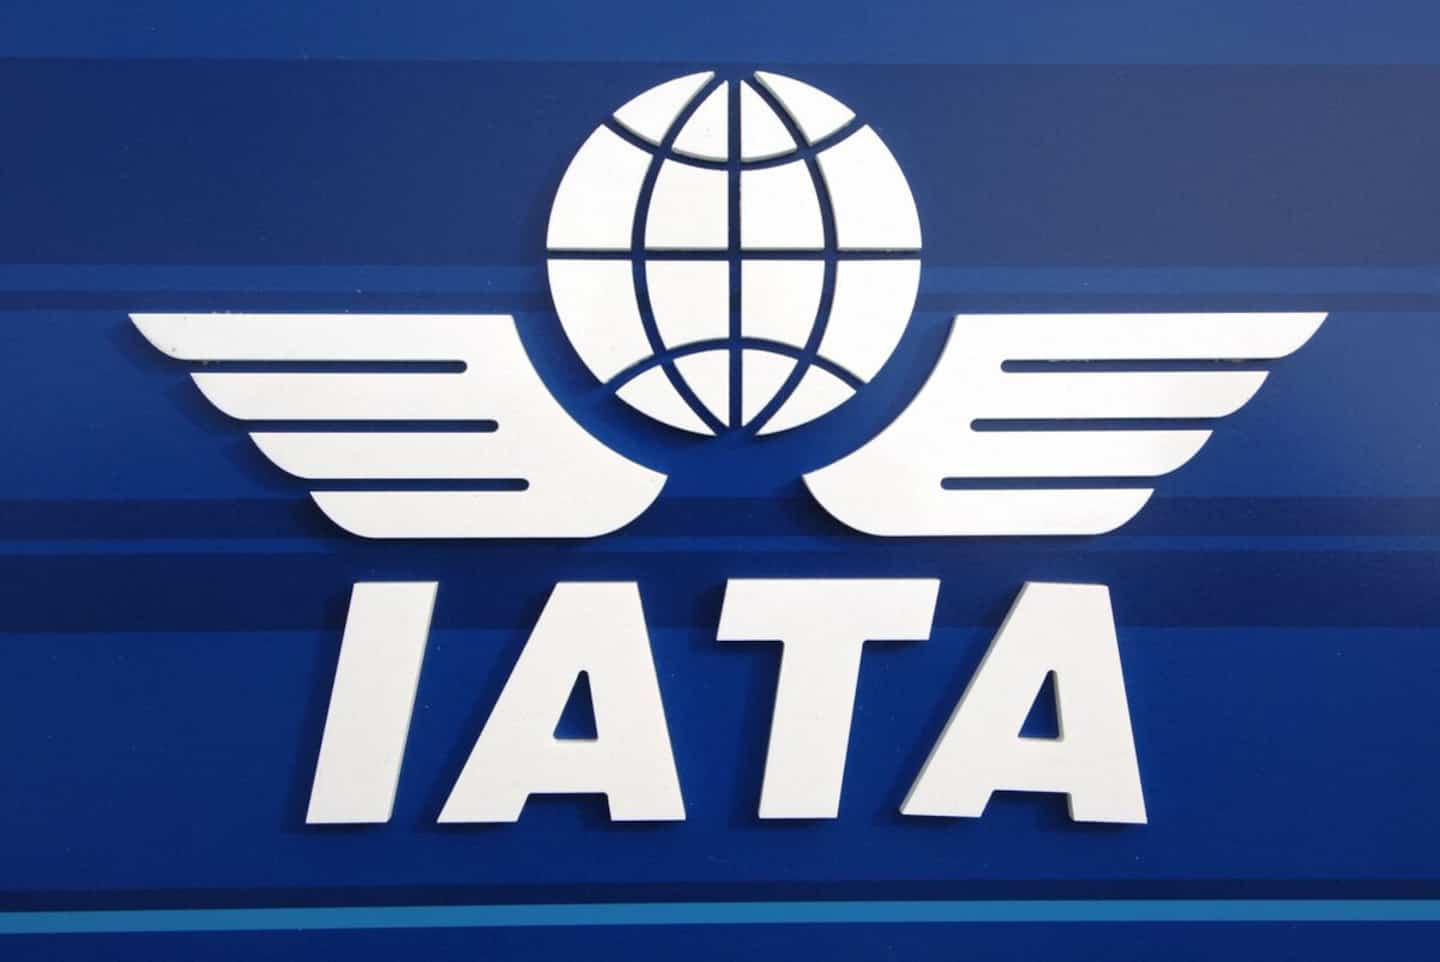 Covid tests on travelers from China: Iata denounces “ineffective” measures